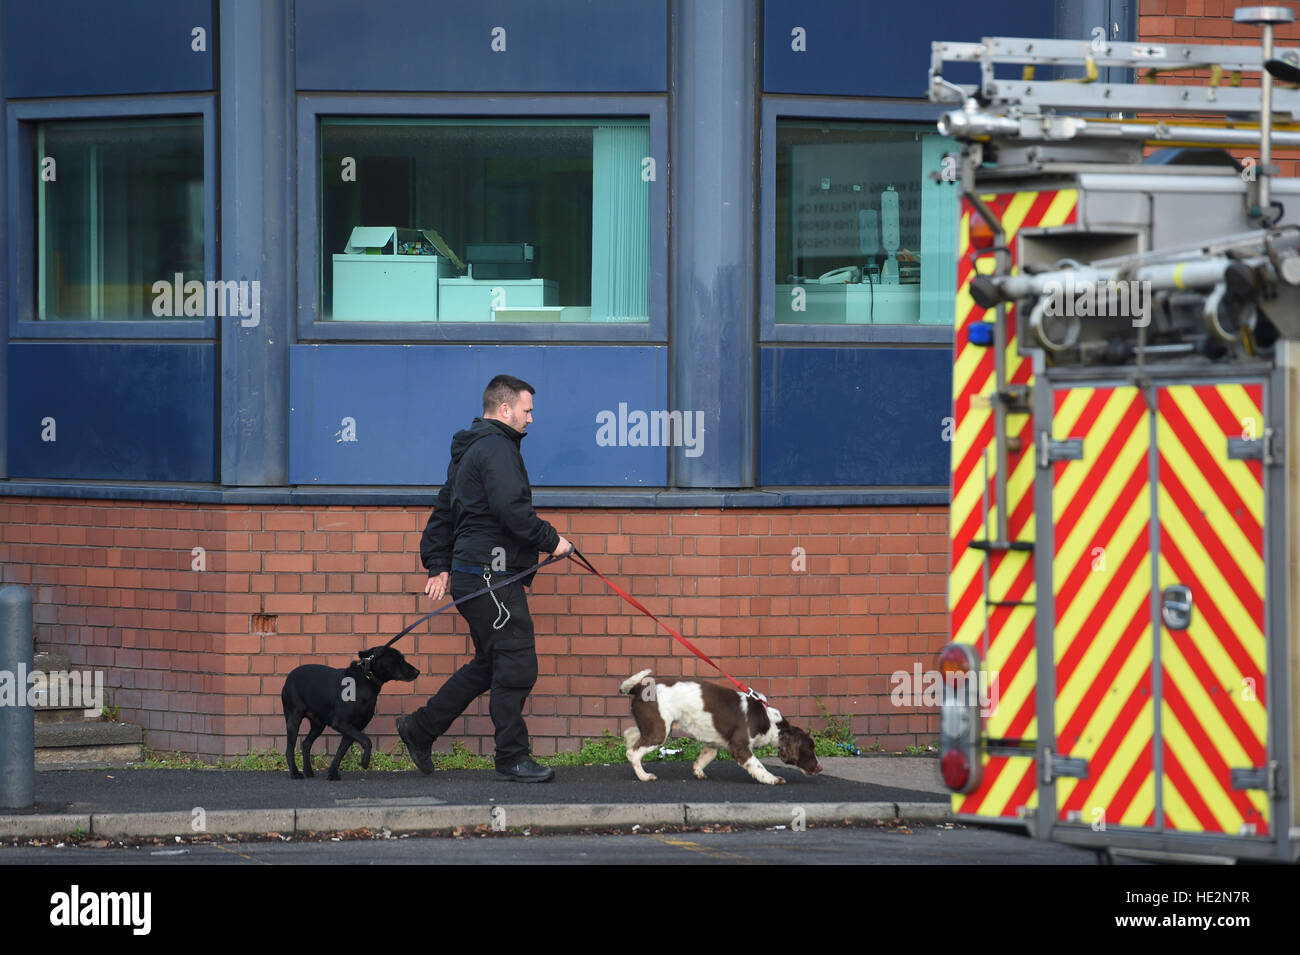 The scene at HMP Birmingham where a disturbance is under way. The trouble is reported to have been taking place across a number of wings at the privately-run prison, with claims also made in local media that prisoners have smashed light fittings and threatened officers. Stock Photo